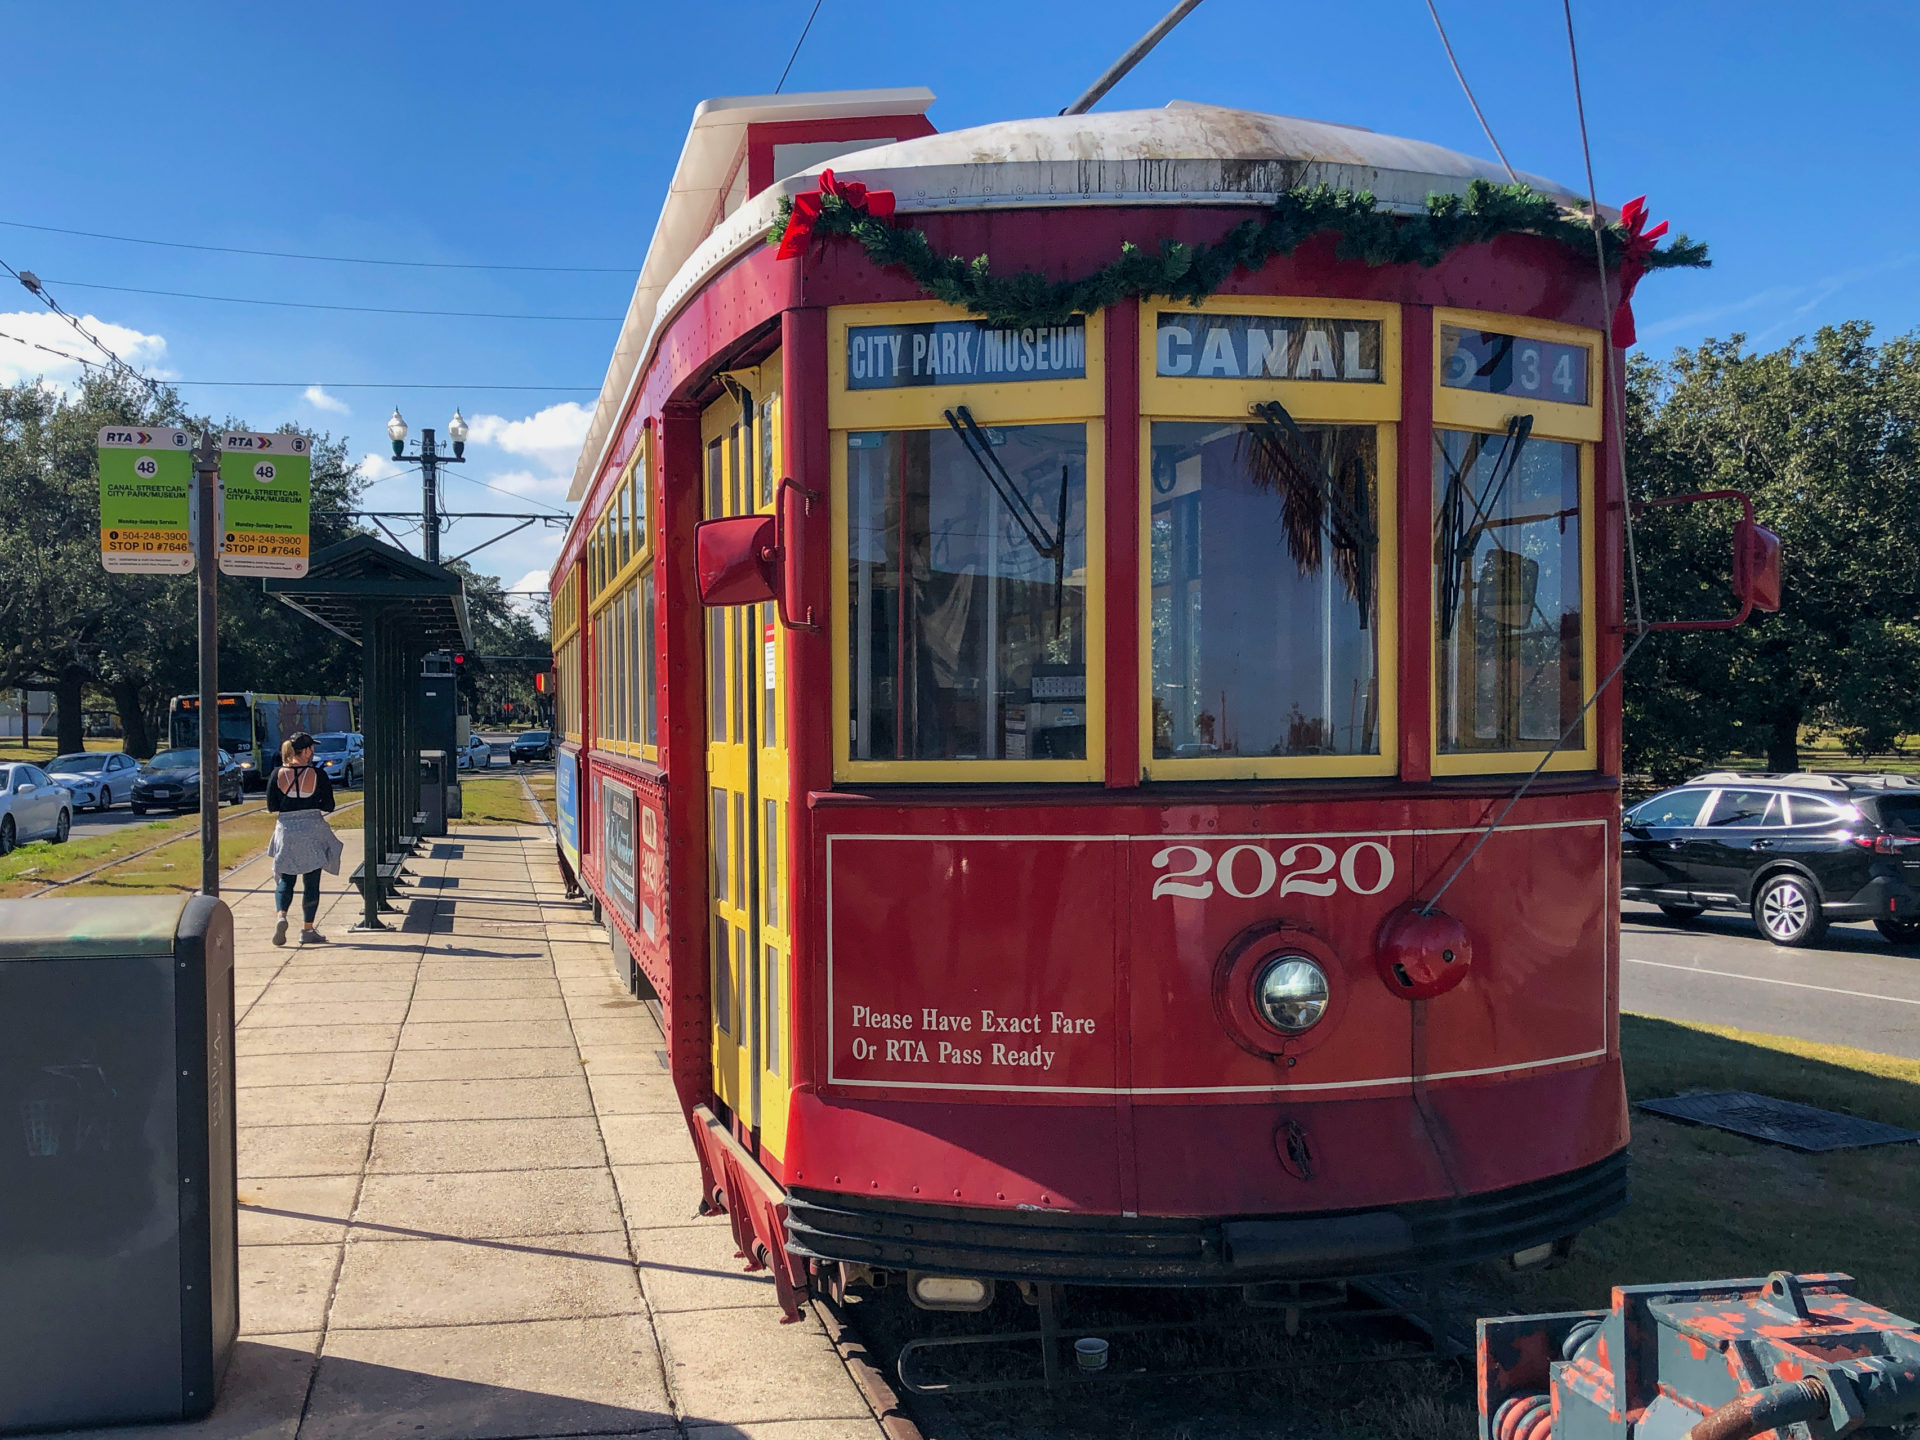 Street Car in New Orleans am City Park